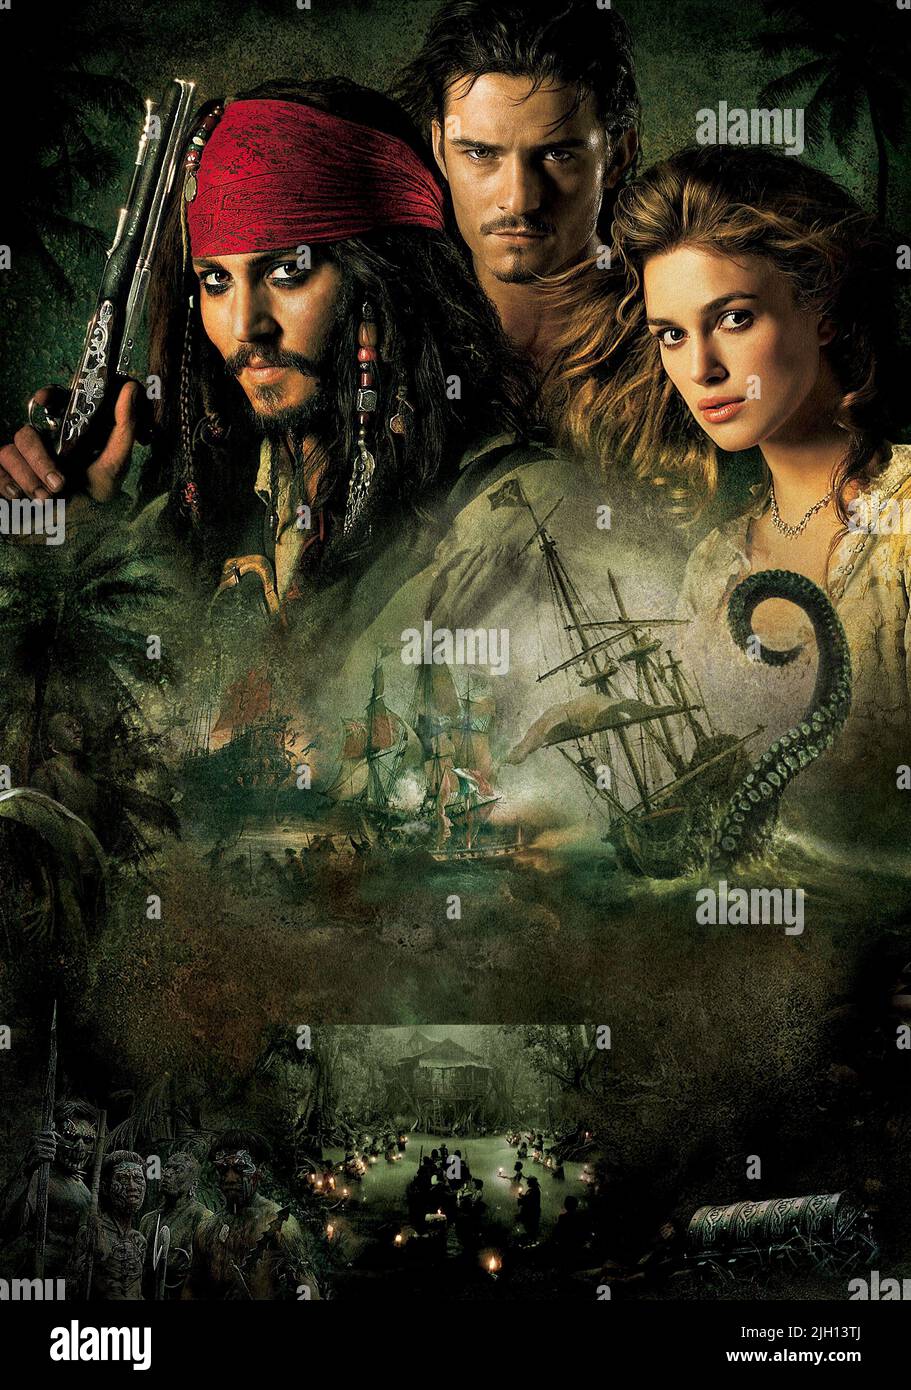 DEPP,BLOOM,KNIGHTLEY, PIRATES OF THE CARIBBEAN: DEAD MAN'S CHEST, 2006 Stock Photo